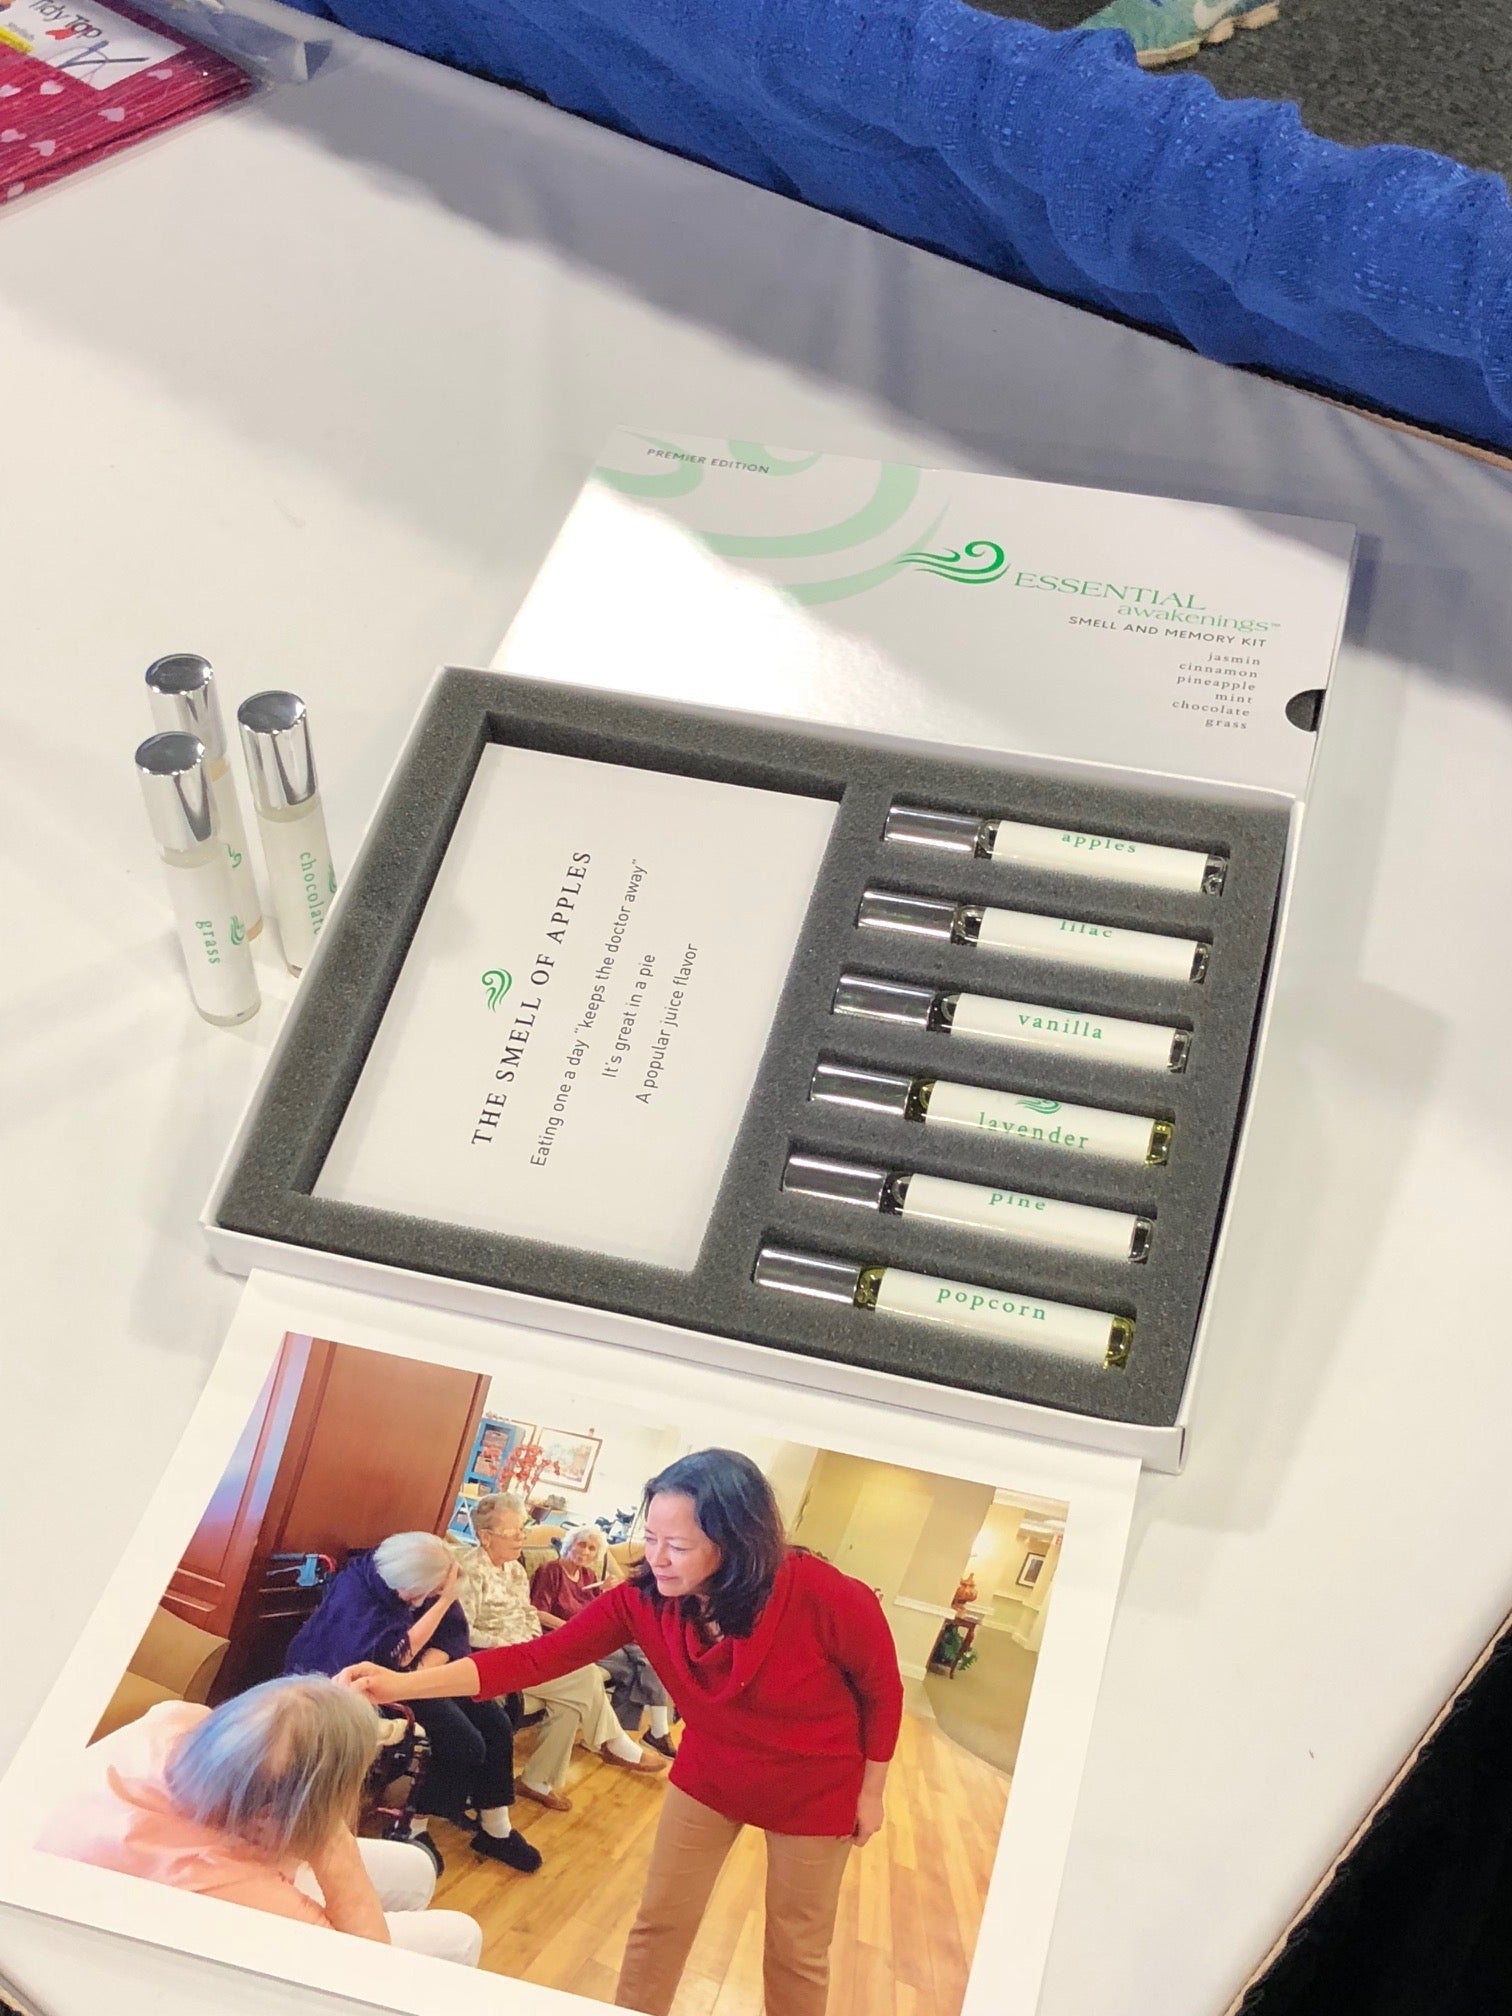 Display of Essential Awakenings™ Smell and Memory Kits at the AOTA 2018 Conference in Salt Lake City